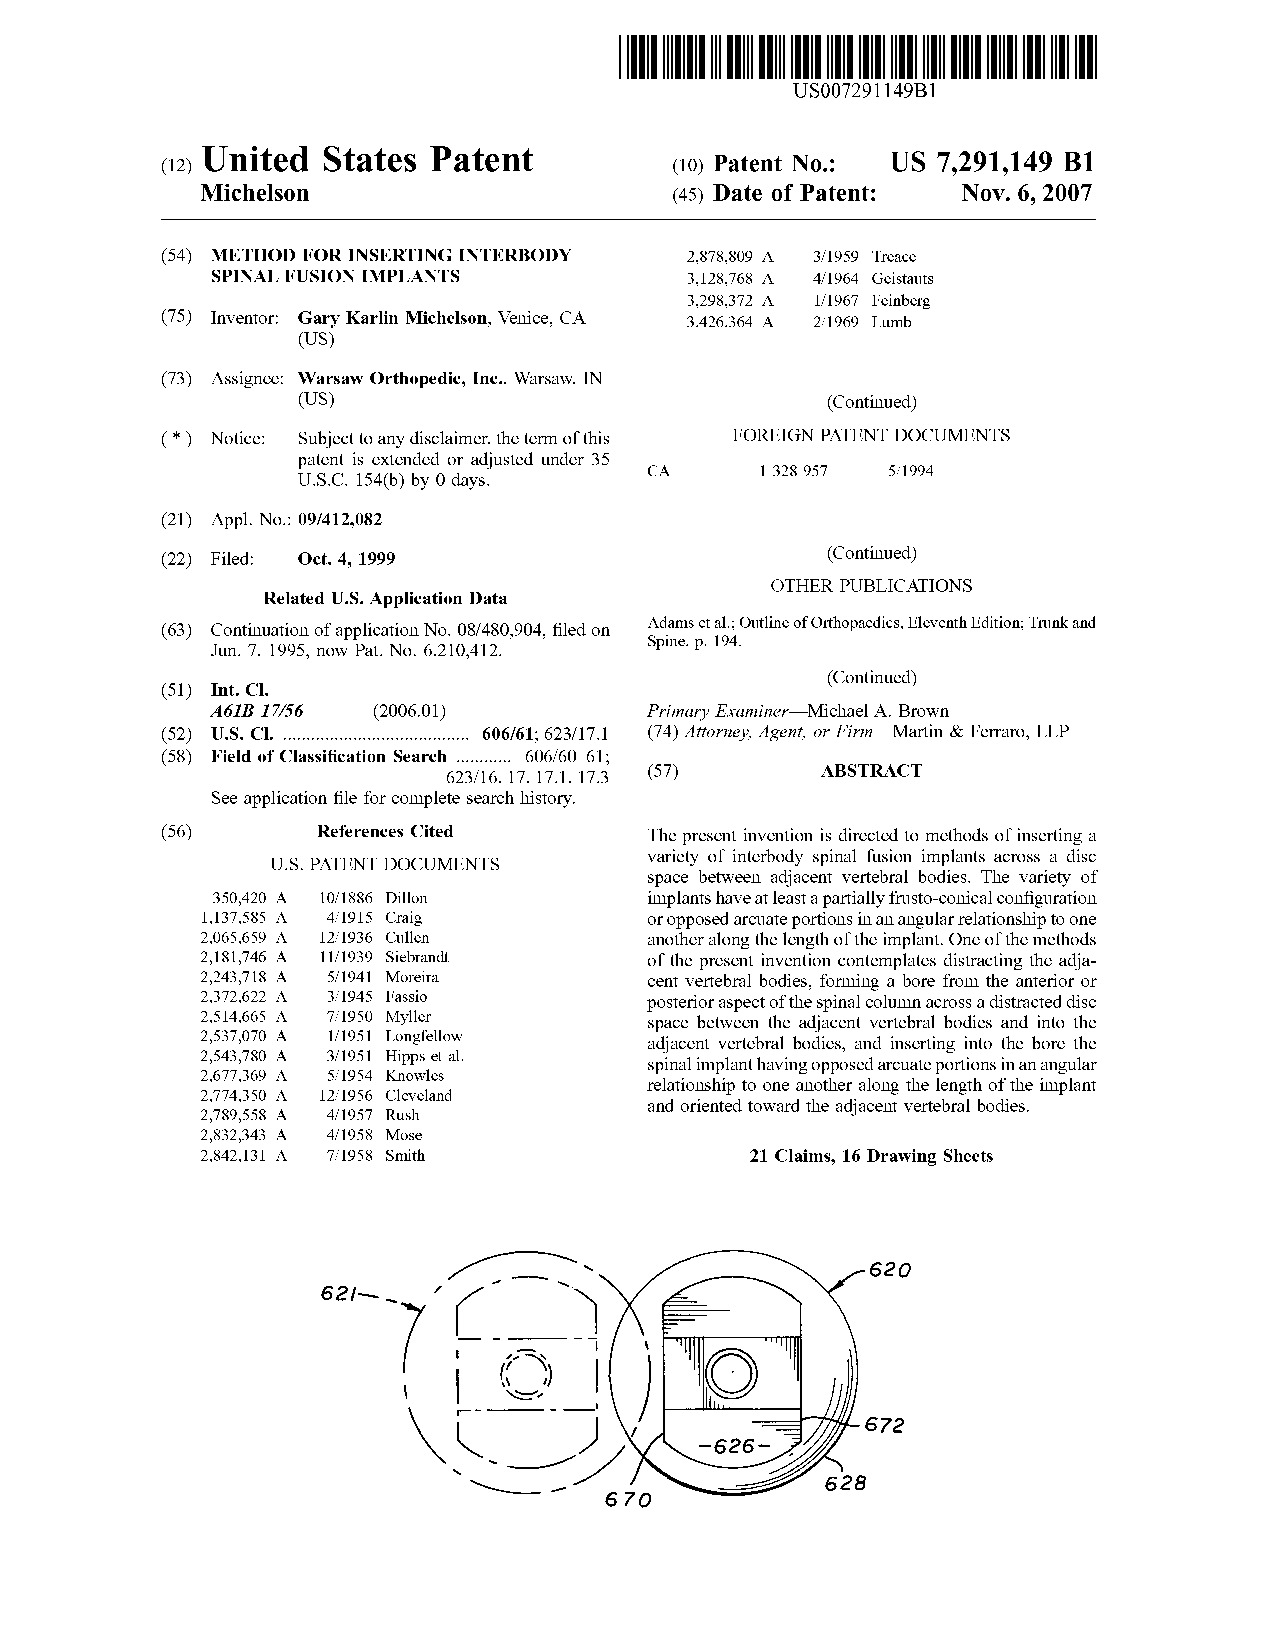 Method for inserting interbody spinal fusion implants - Patent 7,291,149